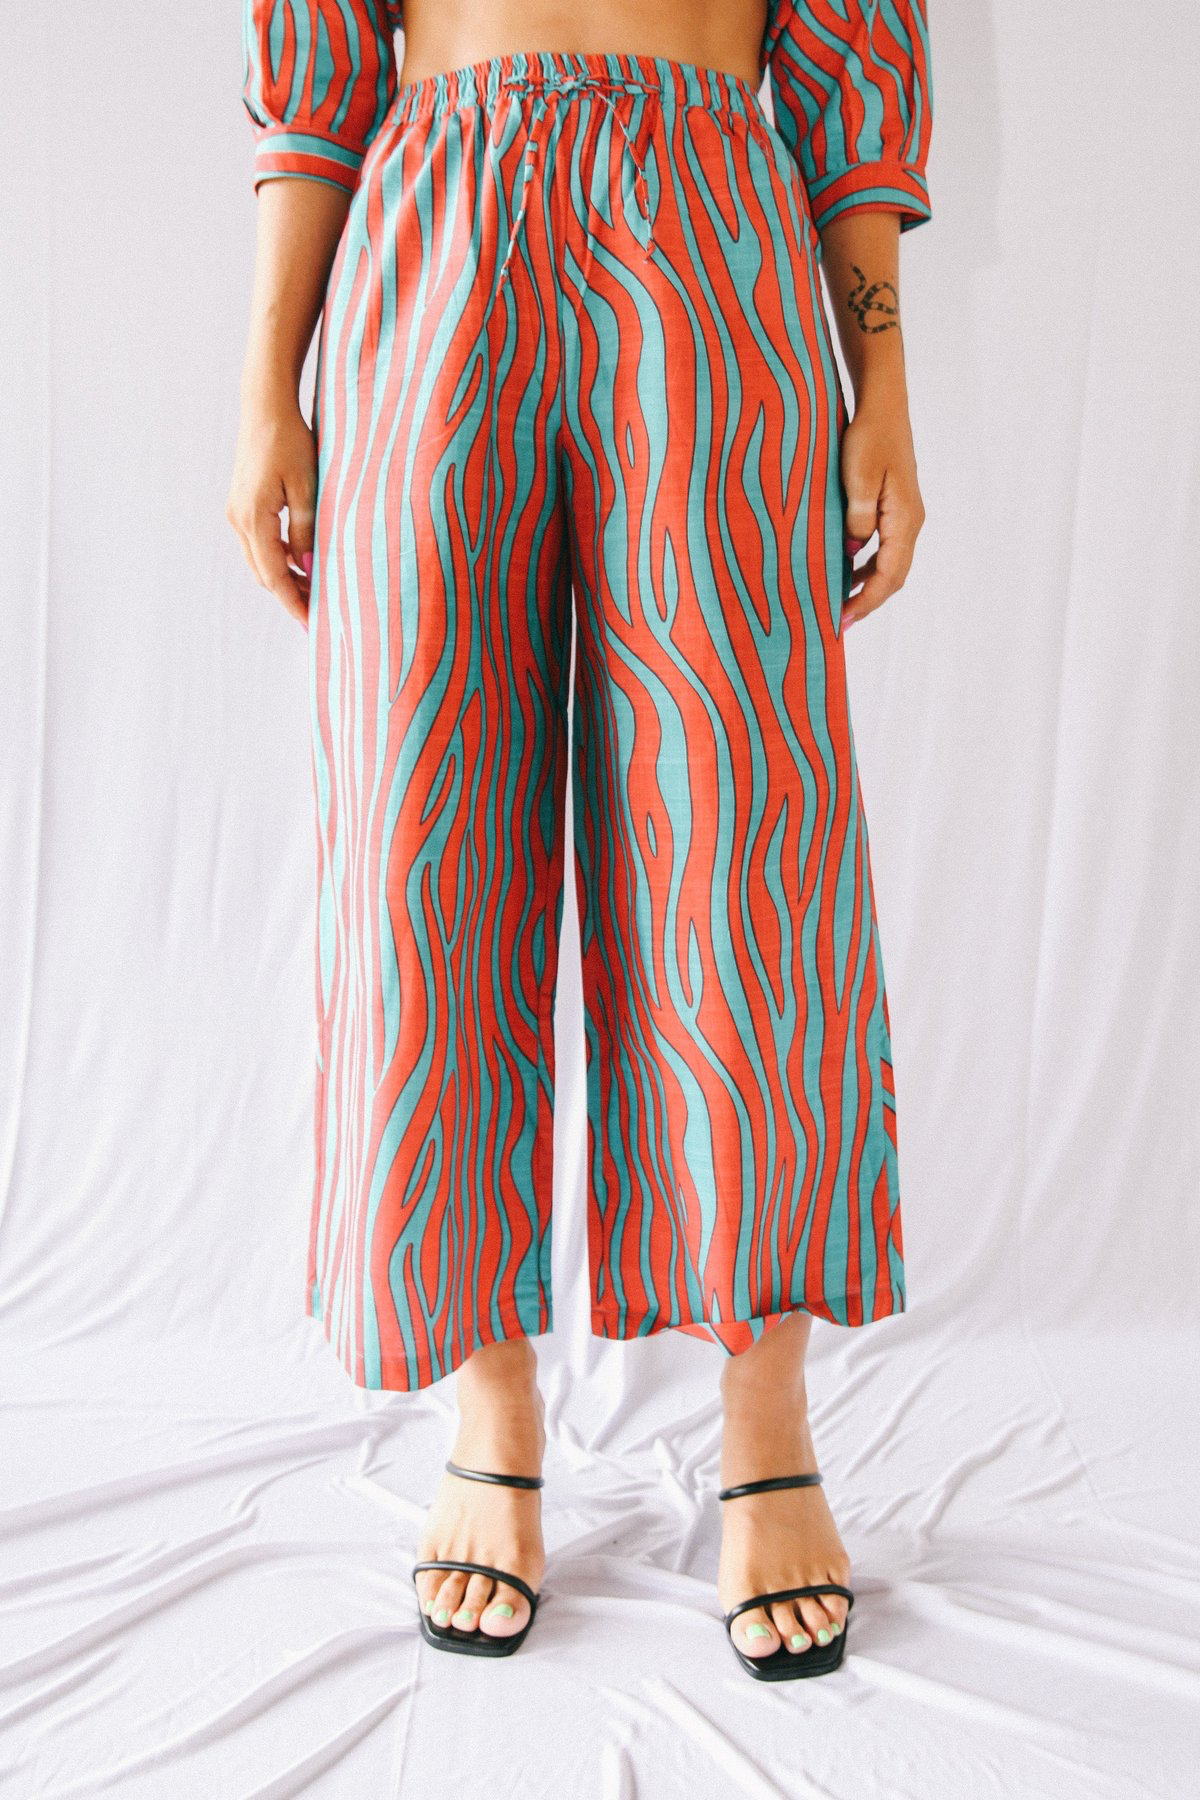 Stain Bamba Pants in Acid, available in ZERRIN